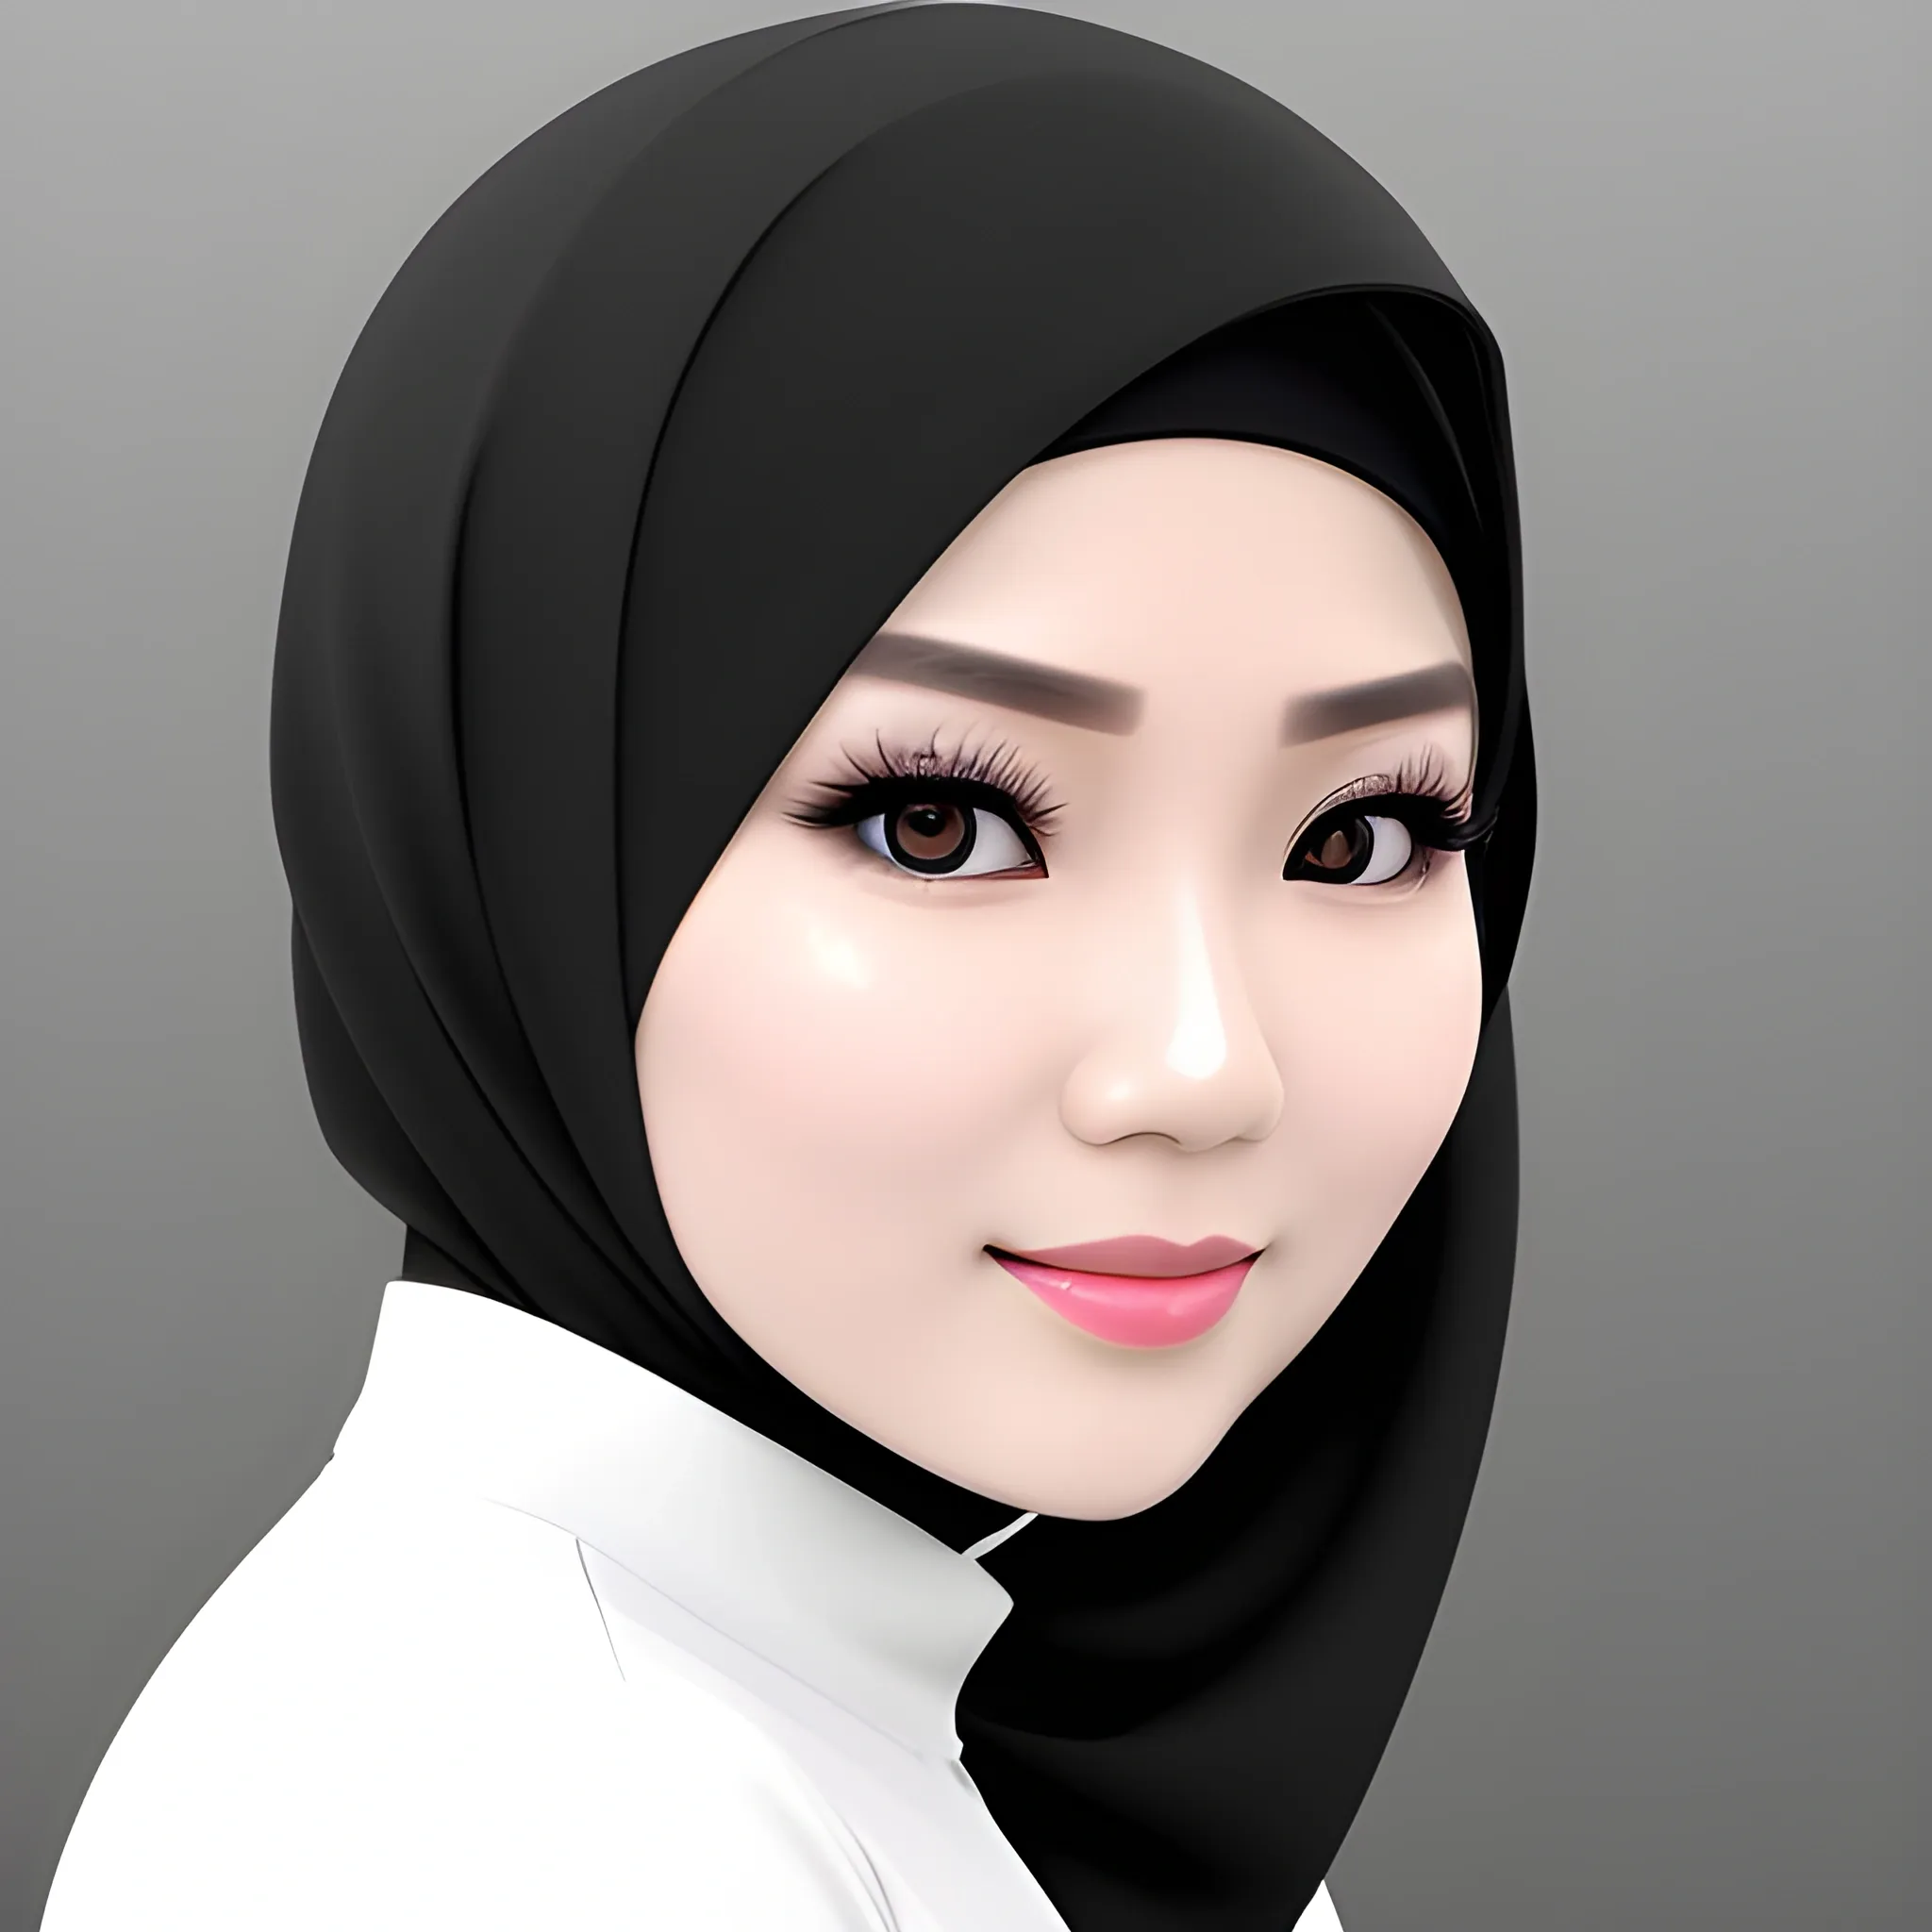 pretty women indonesian, elegant, happy, face detail, sharp nose, black eyes, wearing black hijab, white blouse casual, in the darkness, her eyes looking at camera, 4k, 3D